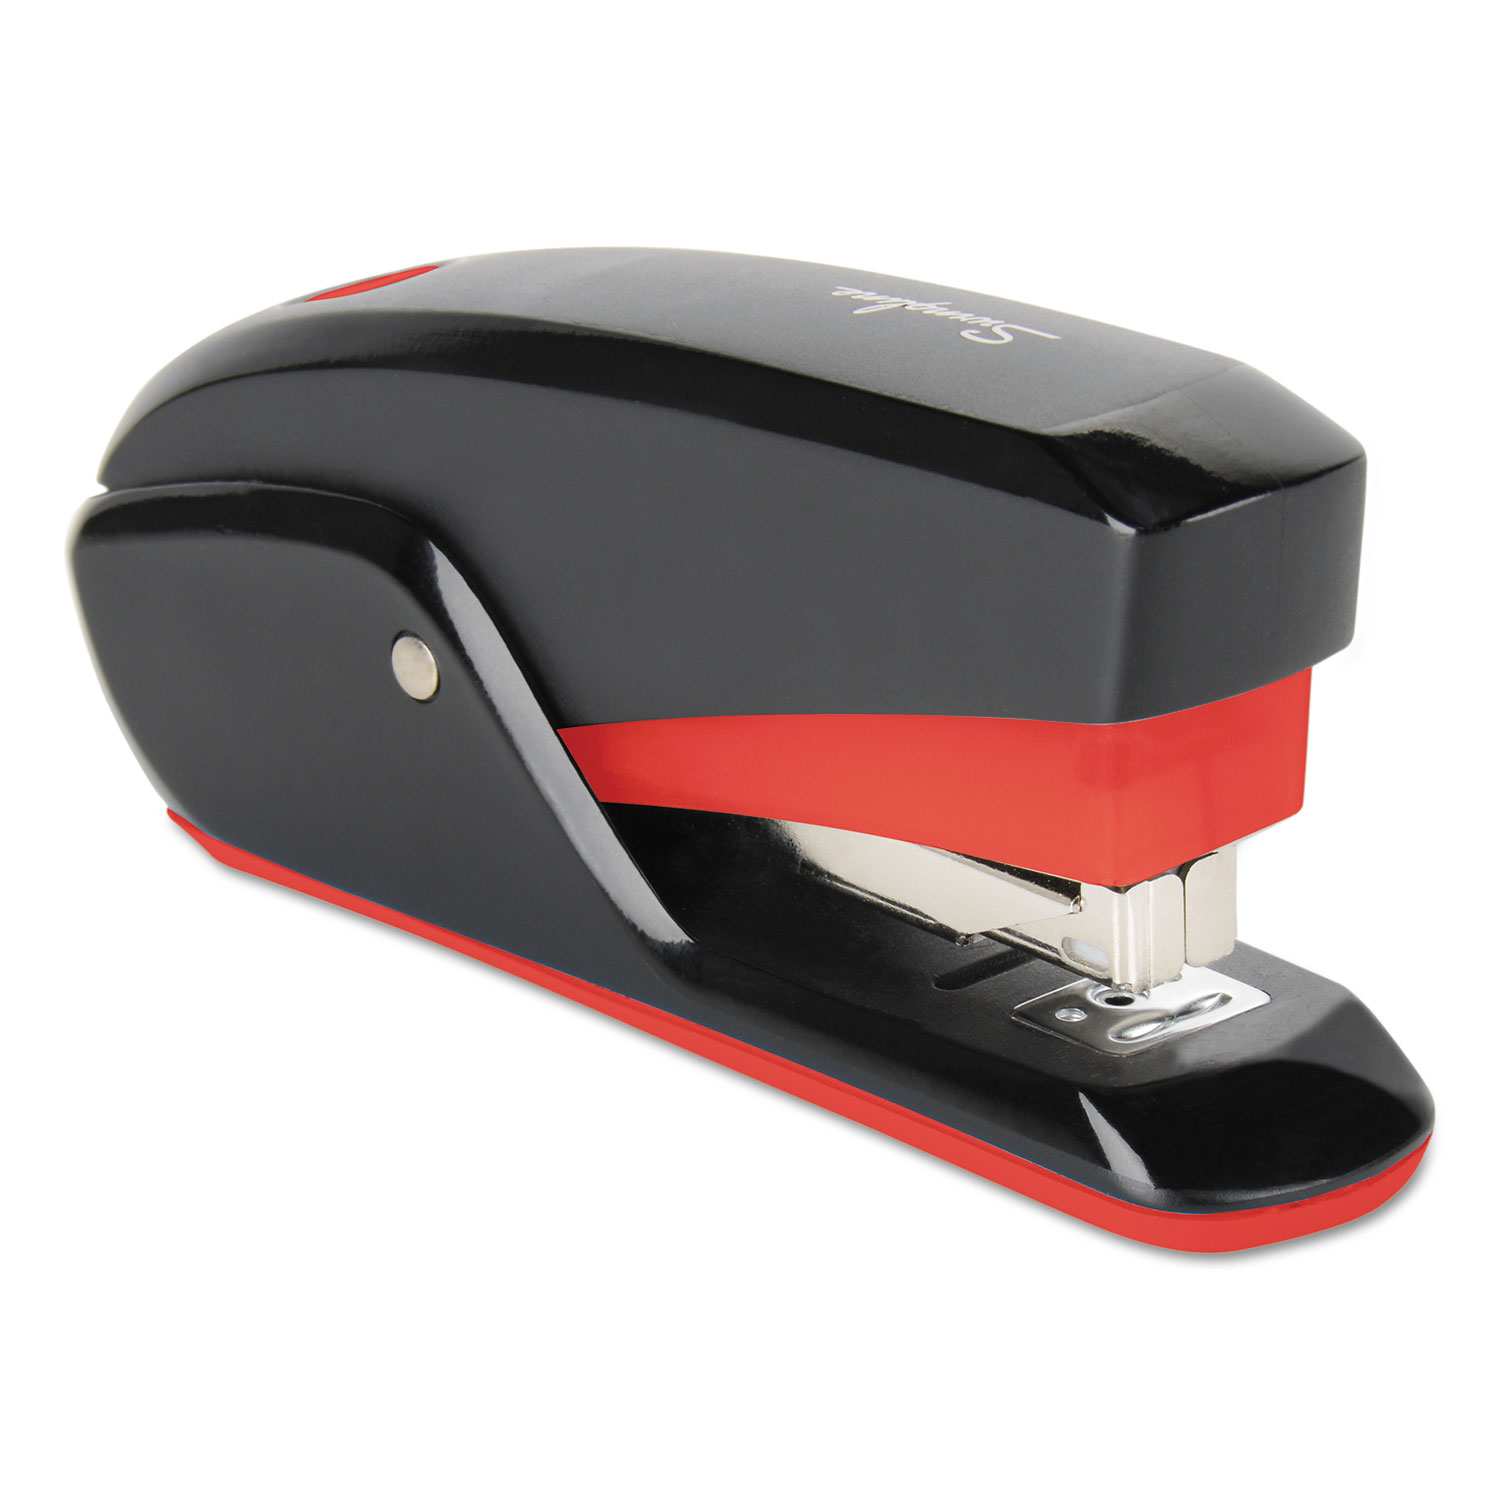 QuickTouch Reduced Effort Compact Stapler, 20-Sheet Capacity, Black/Red